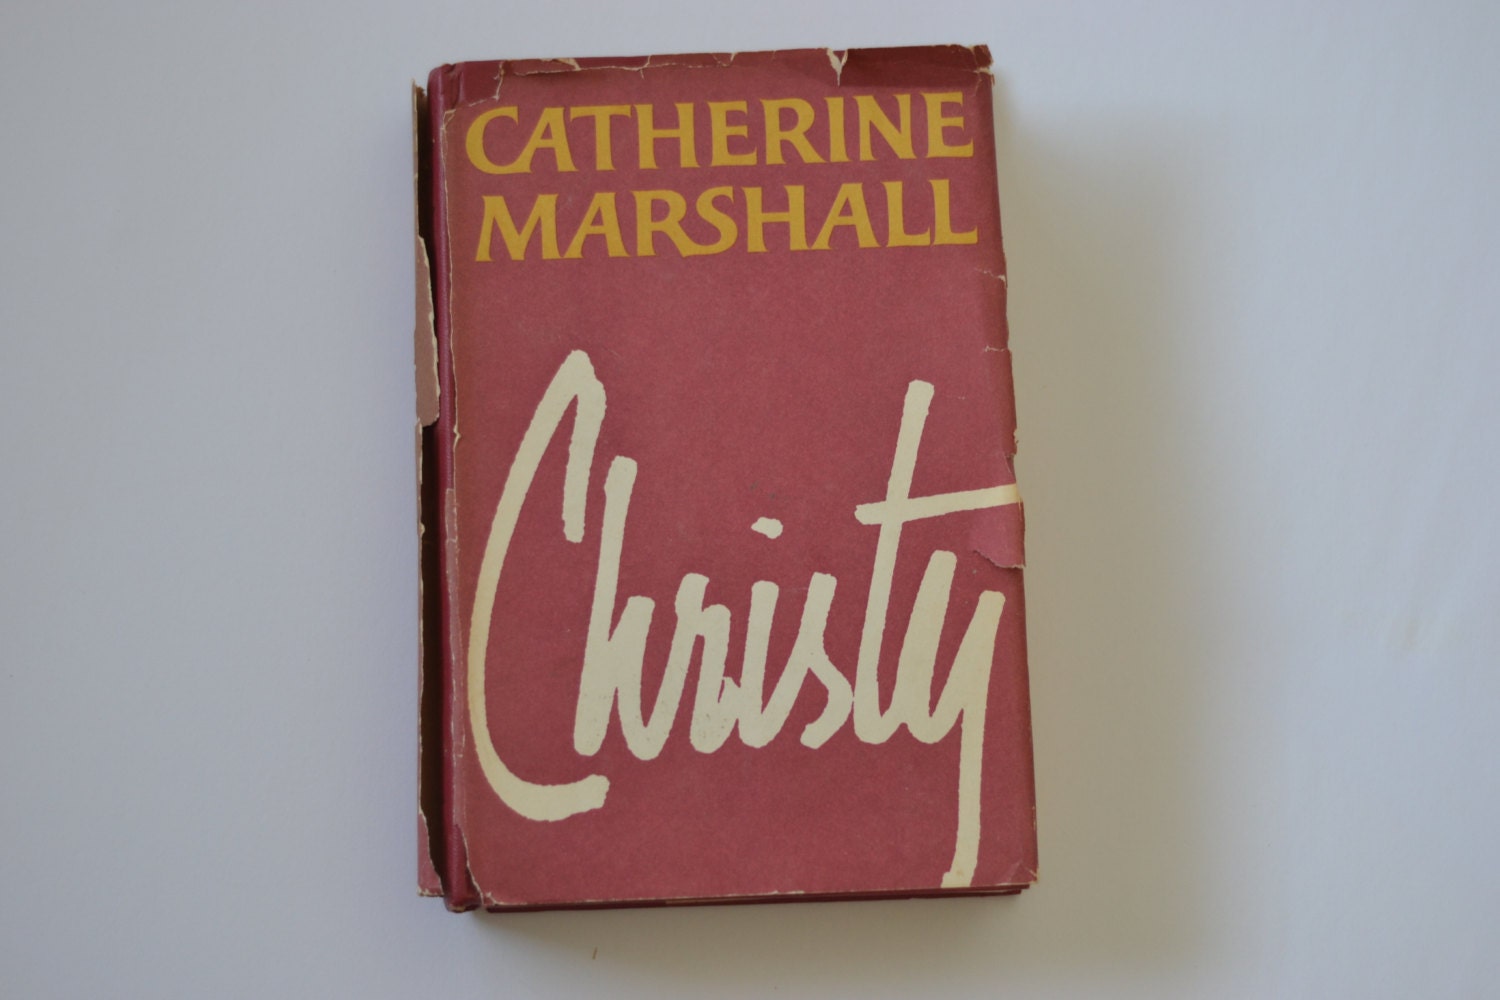 christy book series by catherine marshall